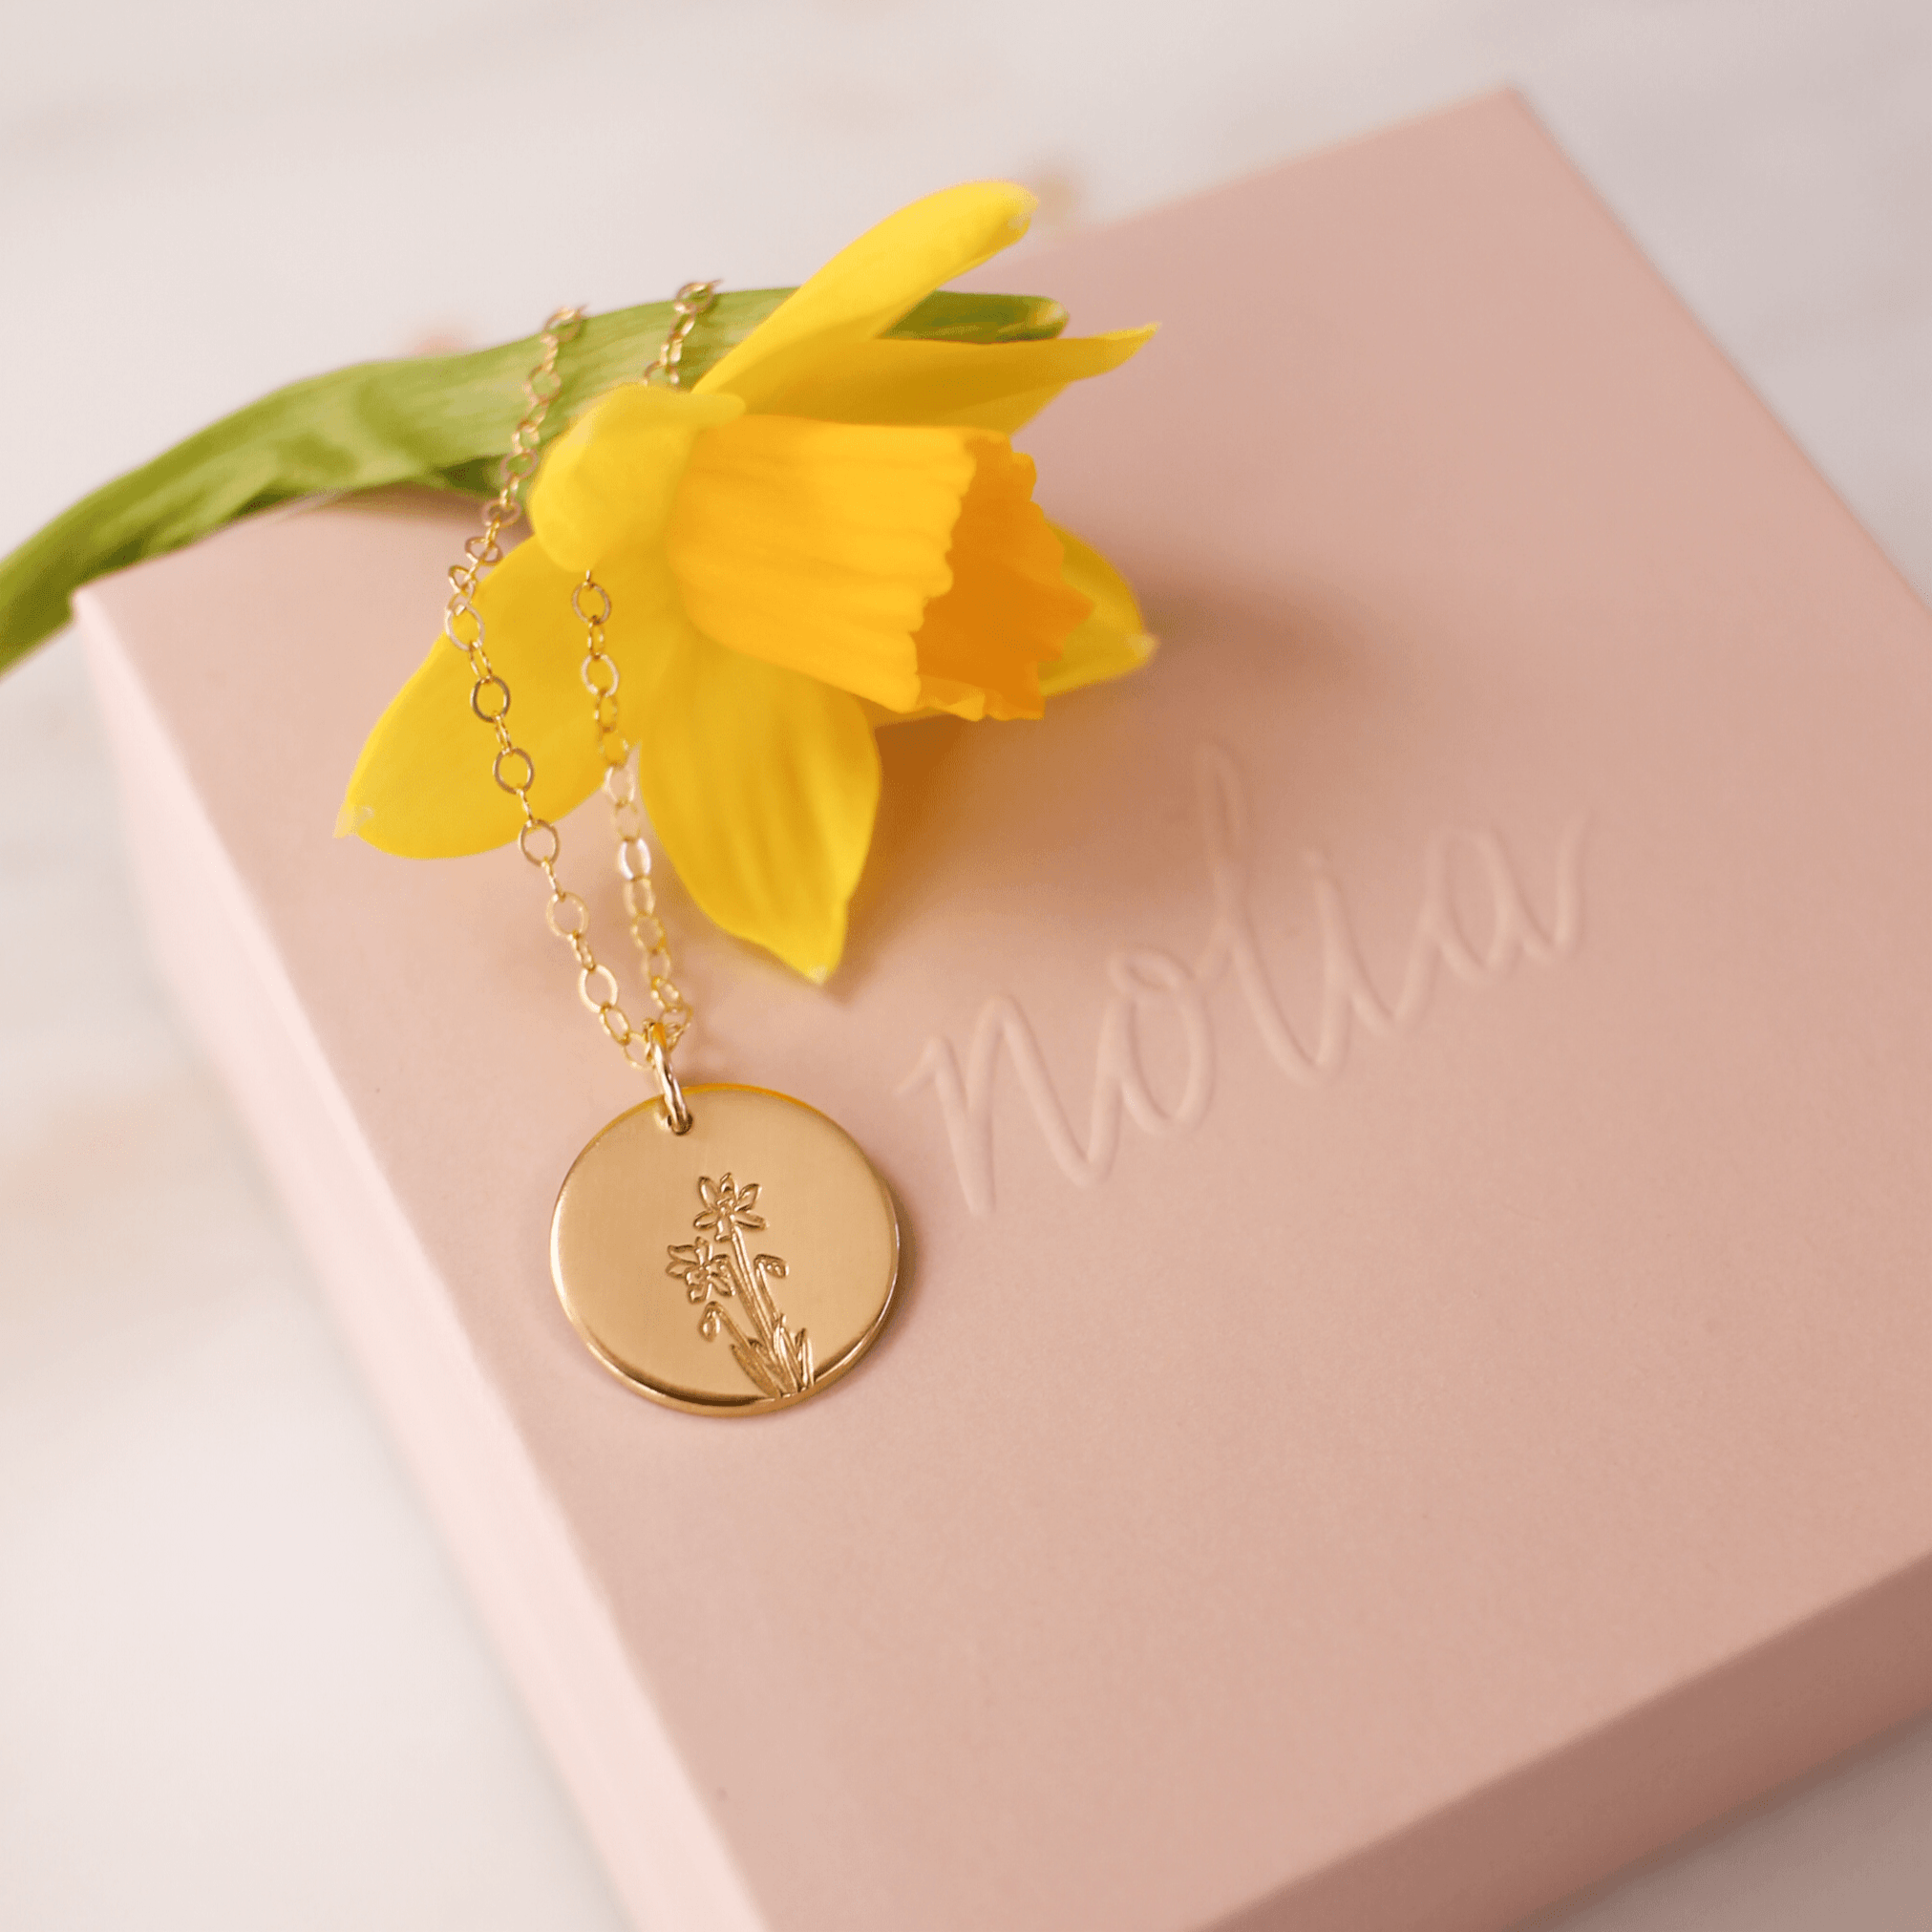 Birth Flower Necklace - Nolia Jewelry - Meaningful + Sustainably Handcrafted Jewelry